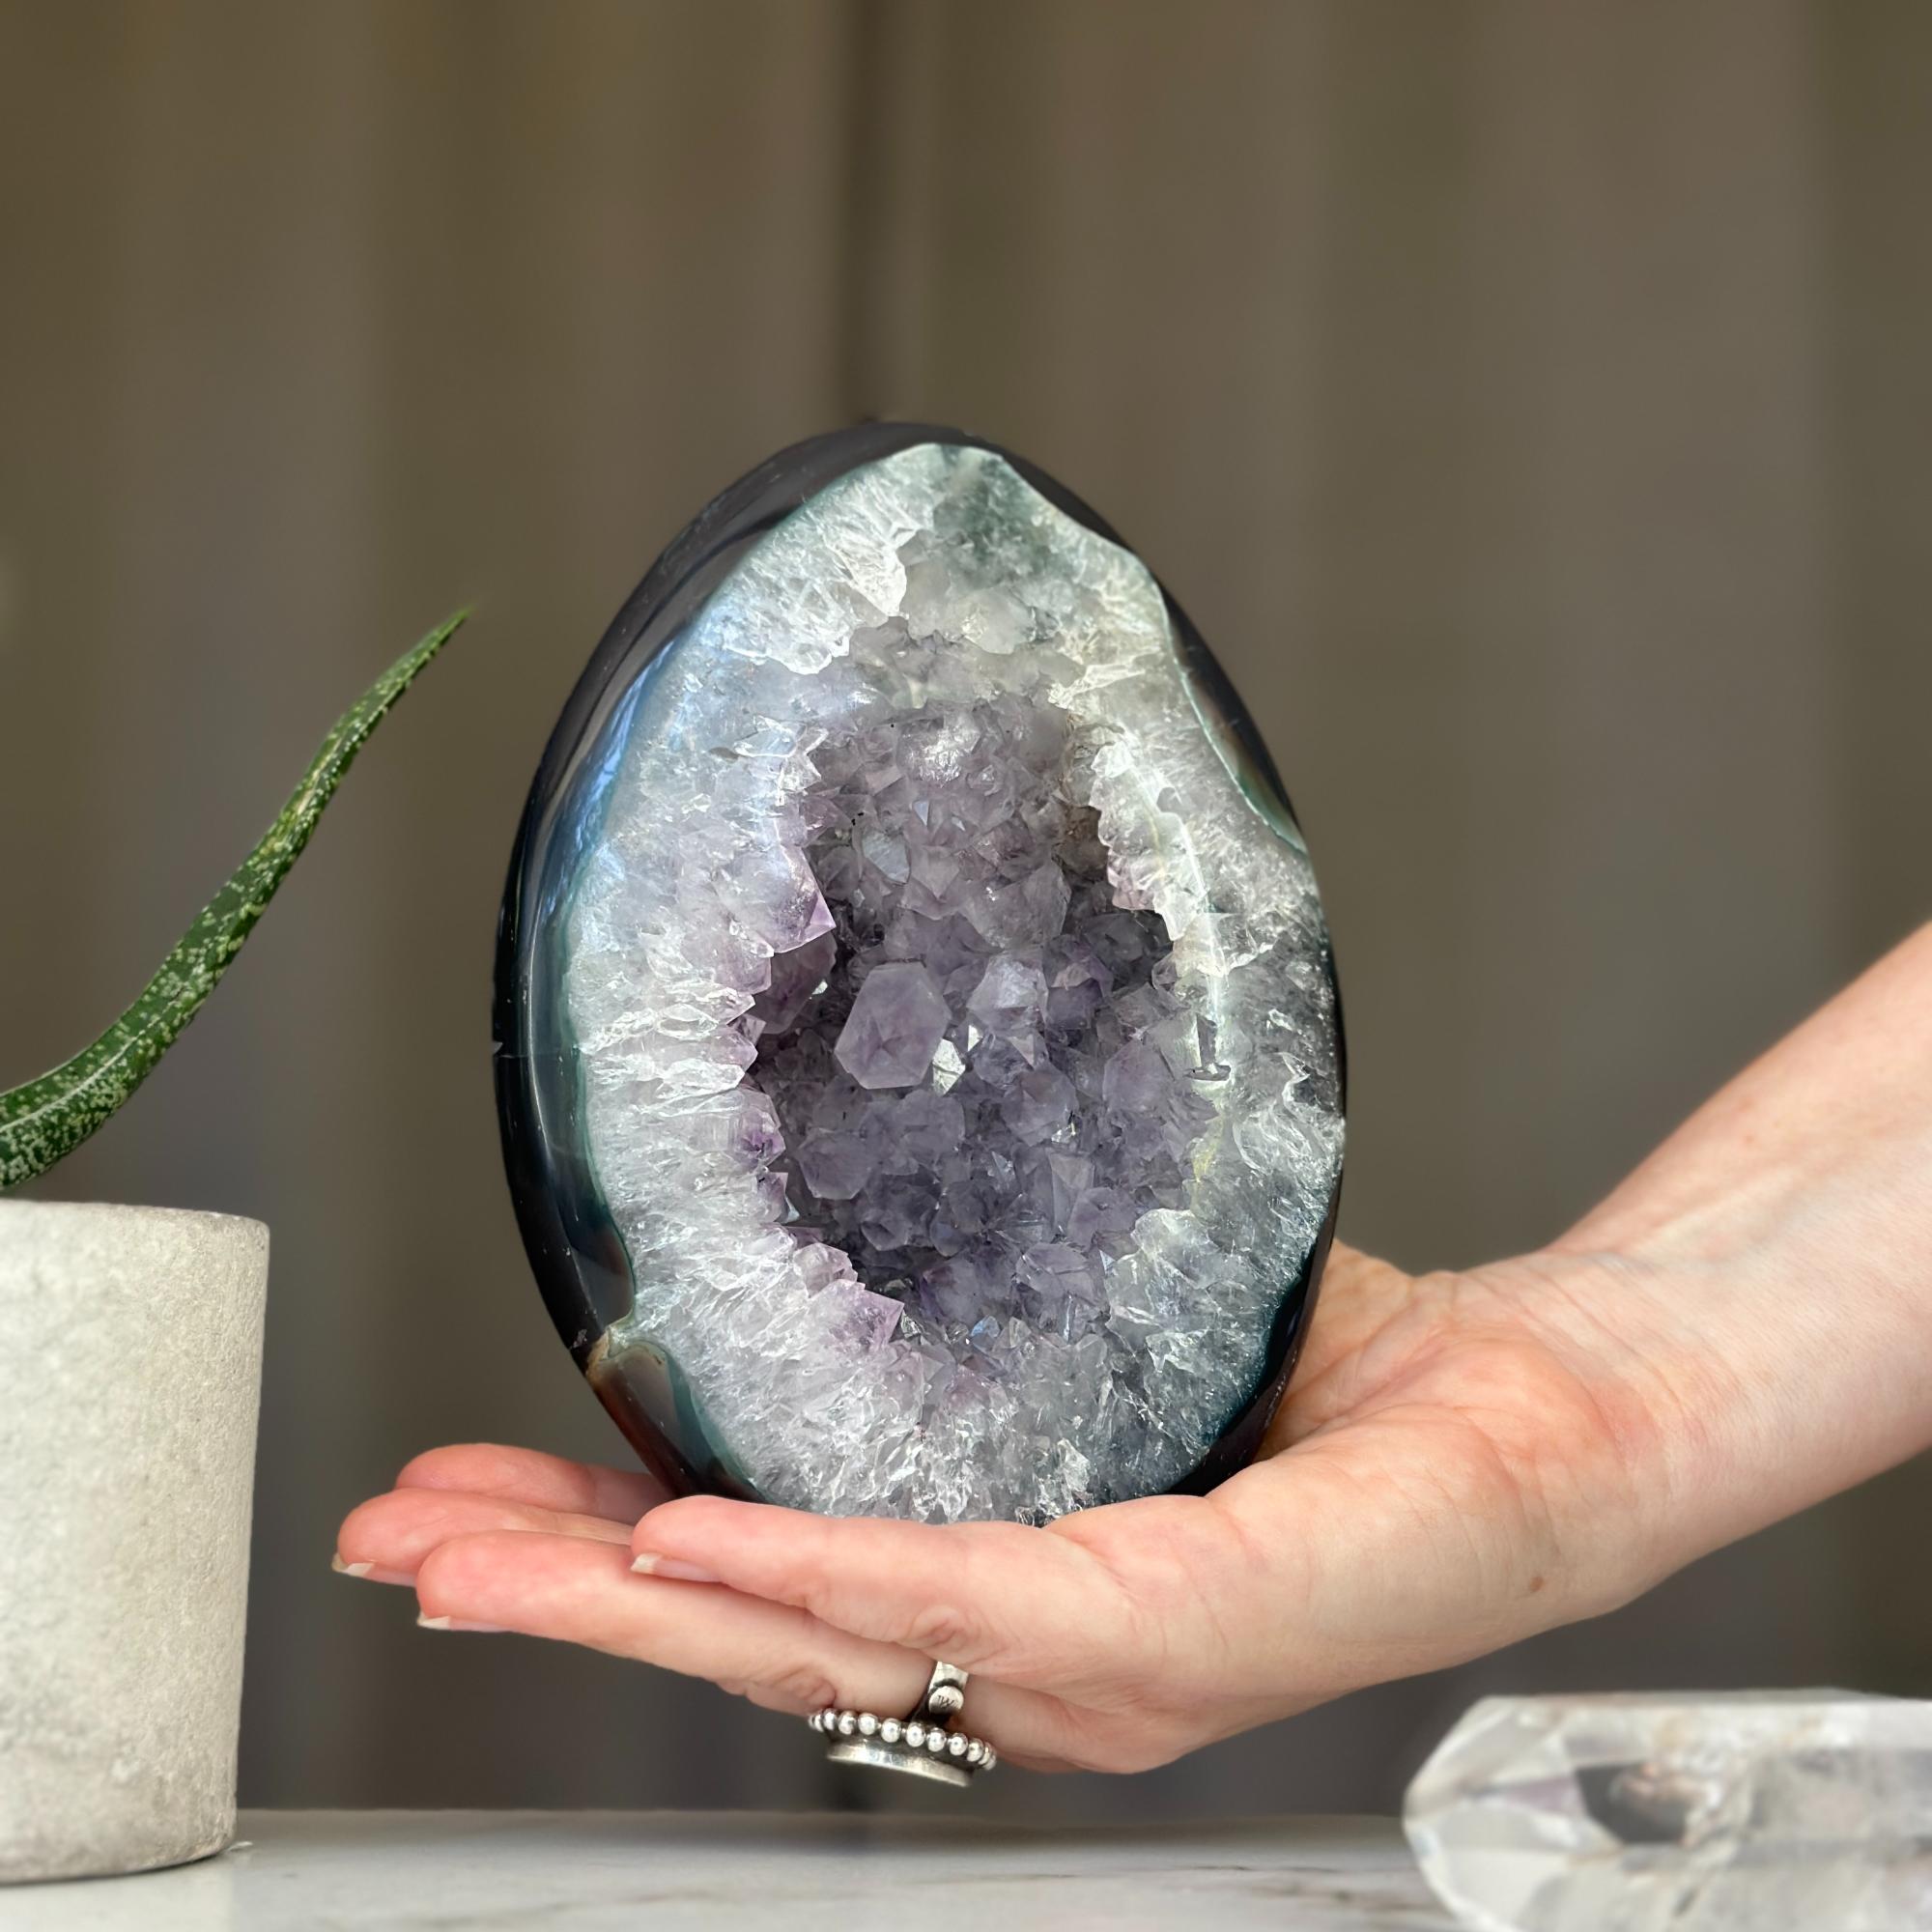 Superb Amethyst Crystal Geode with Agate formations, 7 in tall Extra Large Amethyst Cave, Oval Shaped Stone Polished at edges